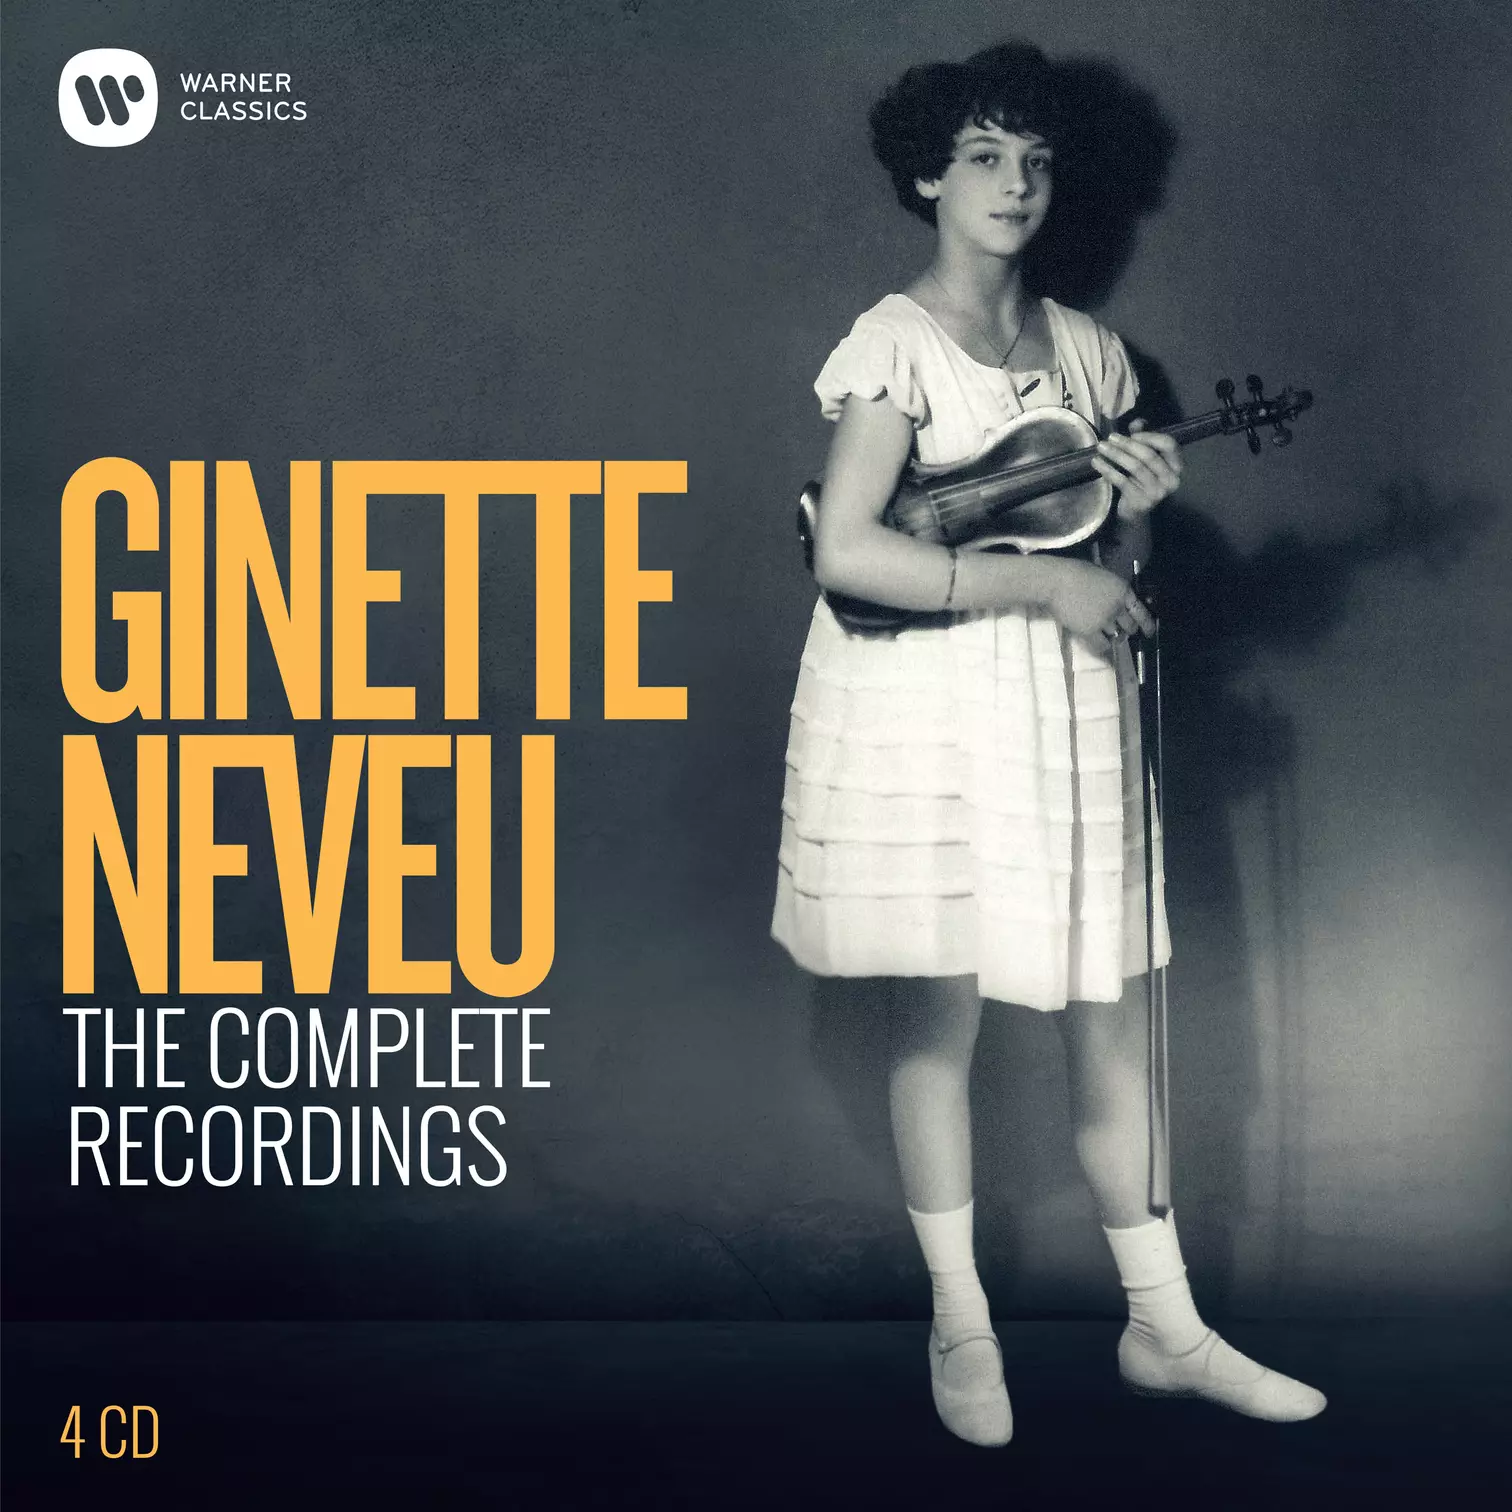 The Complete Recordings Ginette Neveu